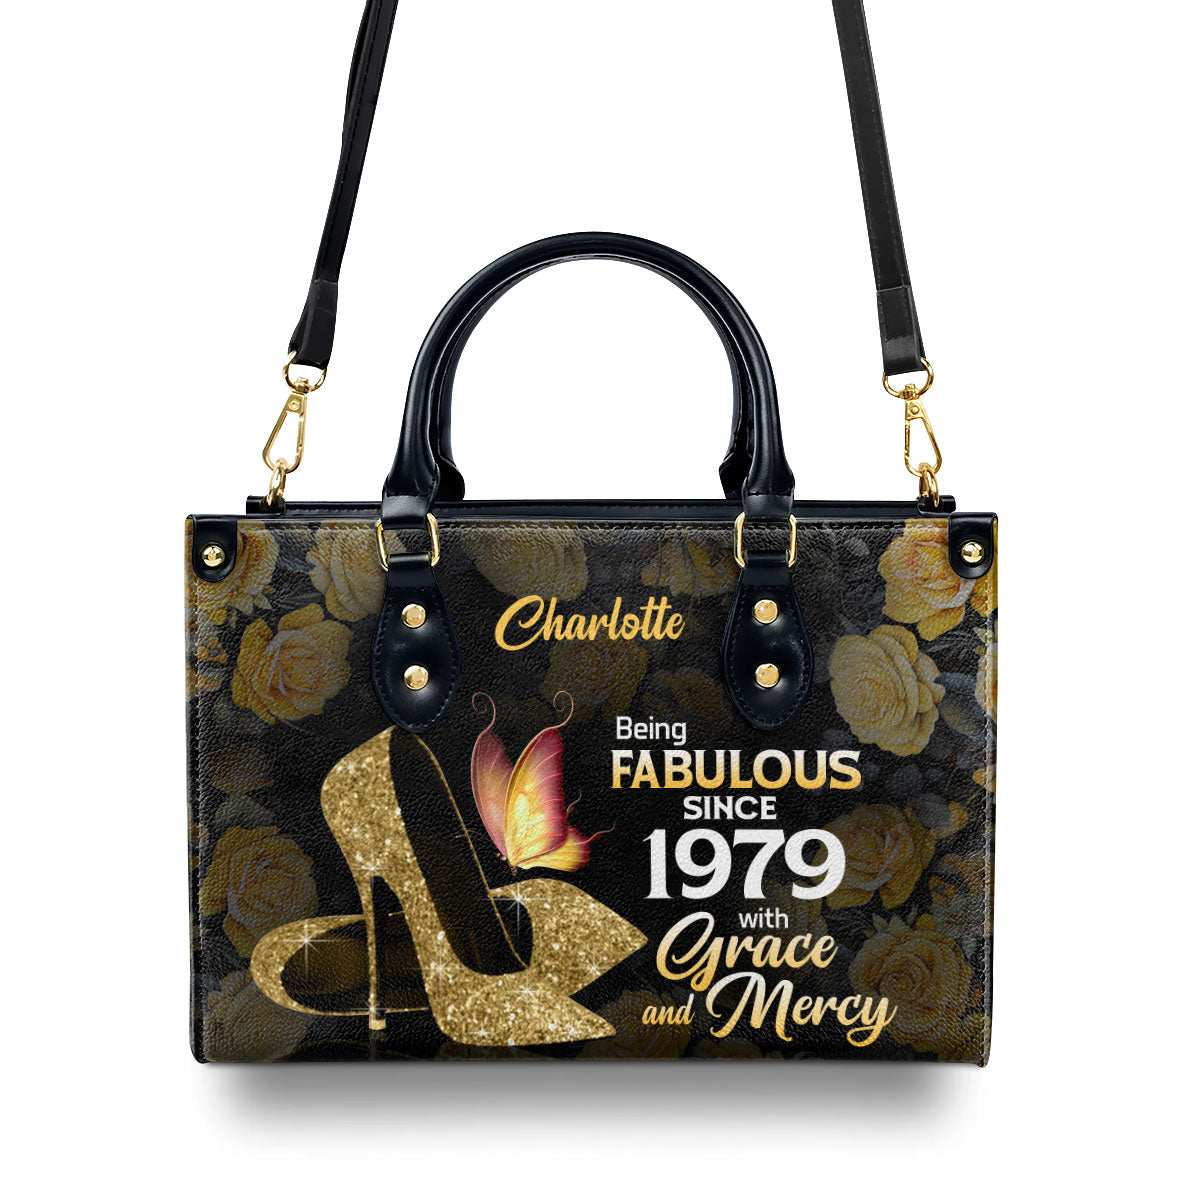 Being Fabulous With Grace and Mercy - Personalized Leather Handbag MS-H98